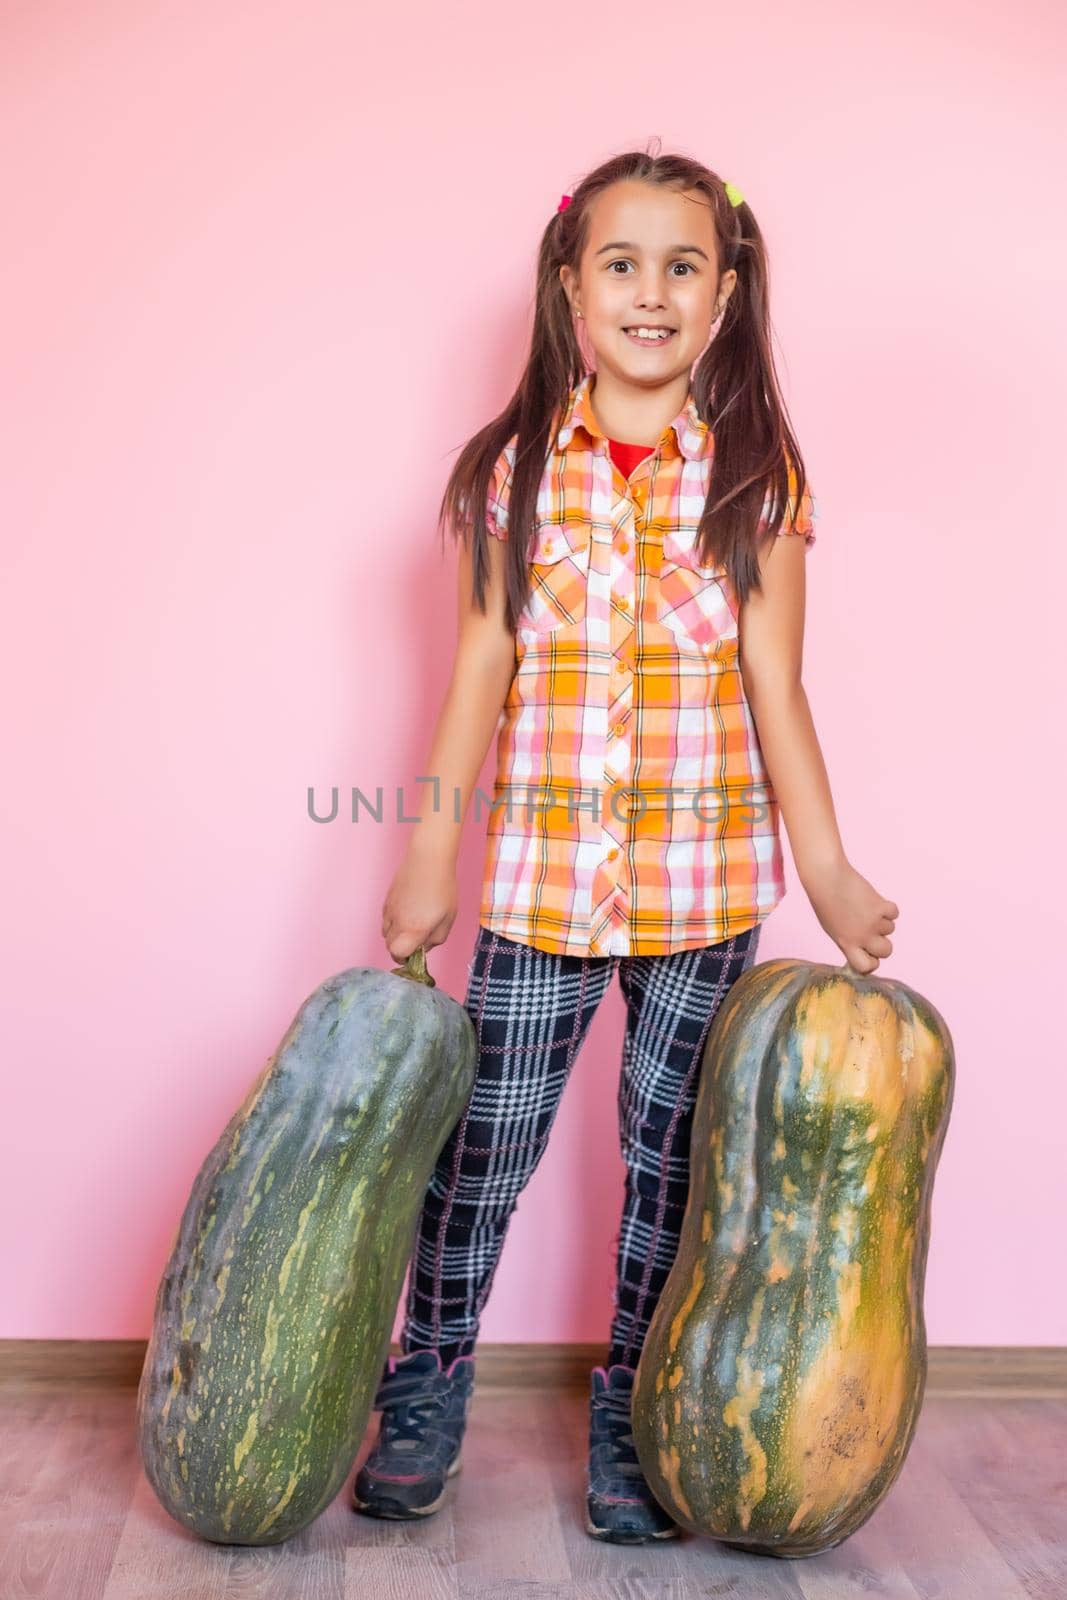 Picture of cheerful positive little girl with pumpkin over pink wall background holding pumpkin showing peace. by Andelov13